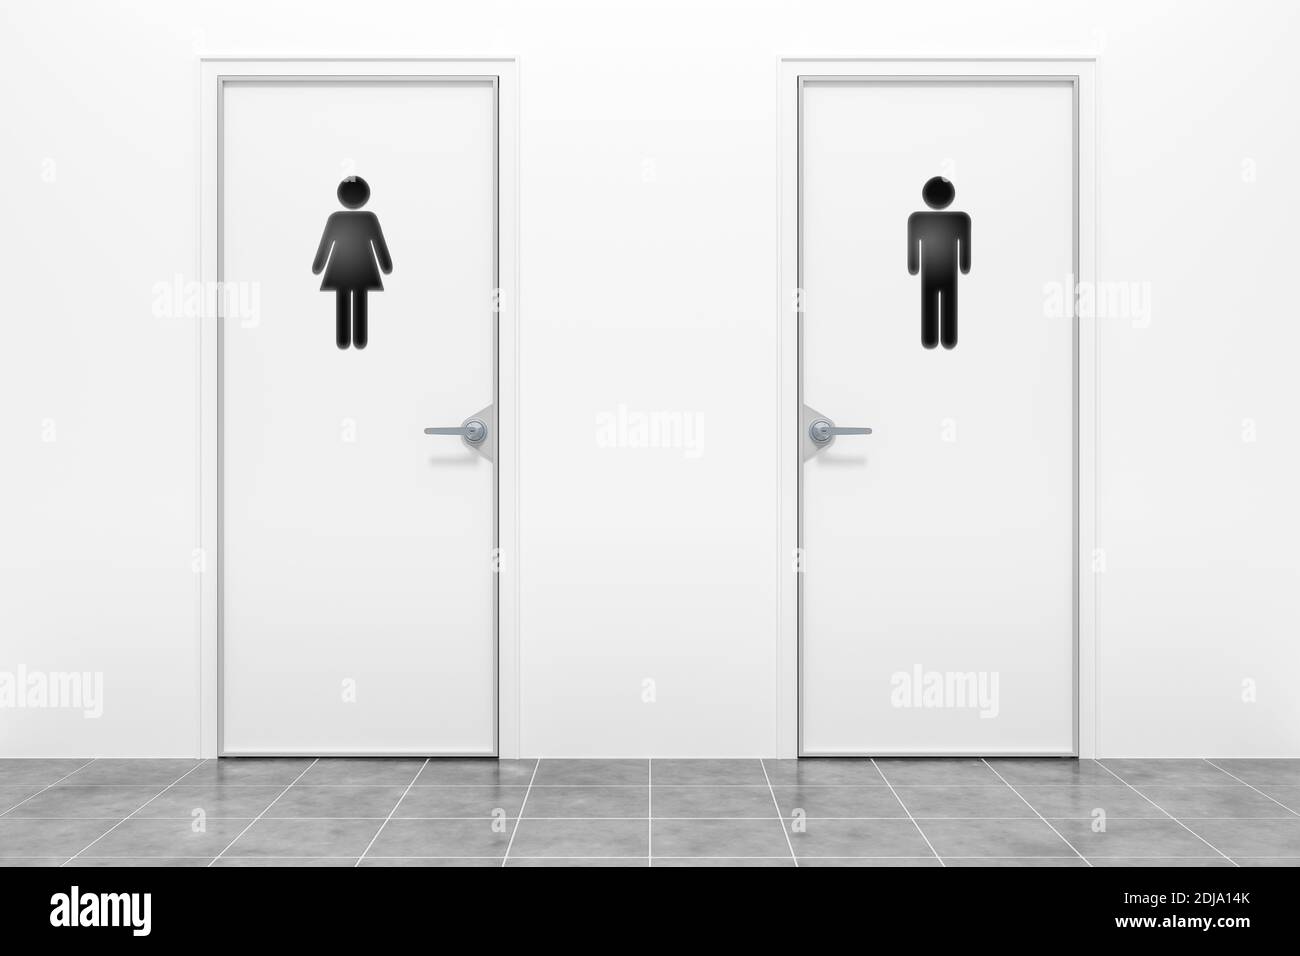 3d rendering of a wc for women and men Stock Photo